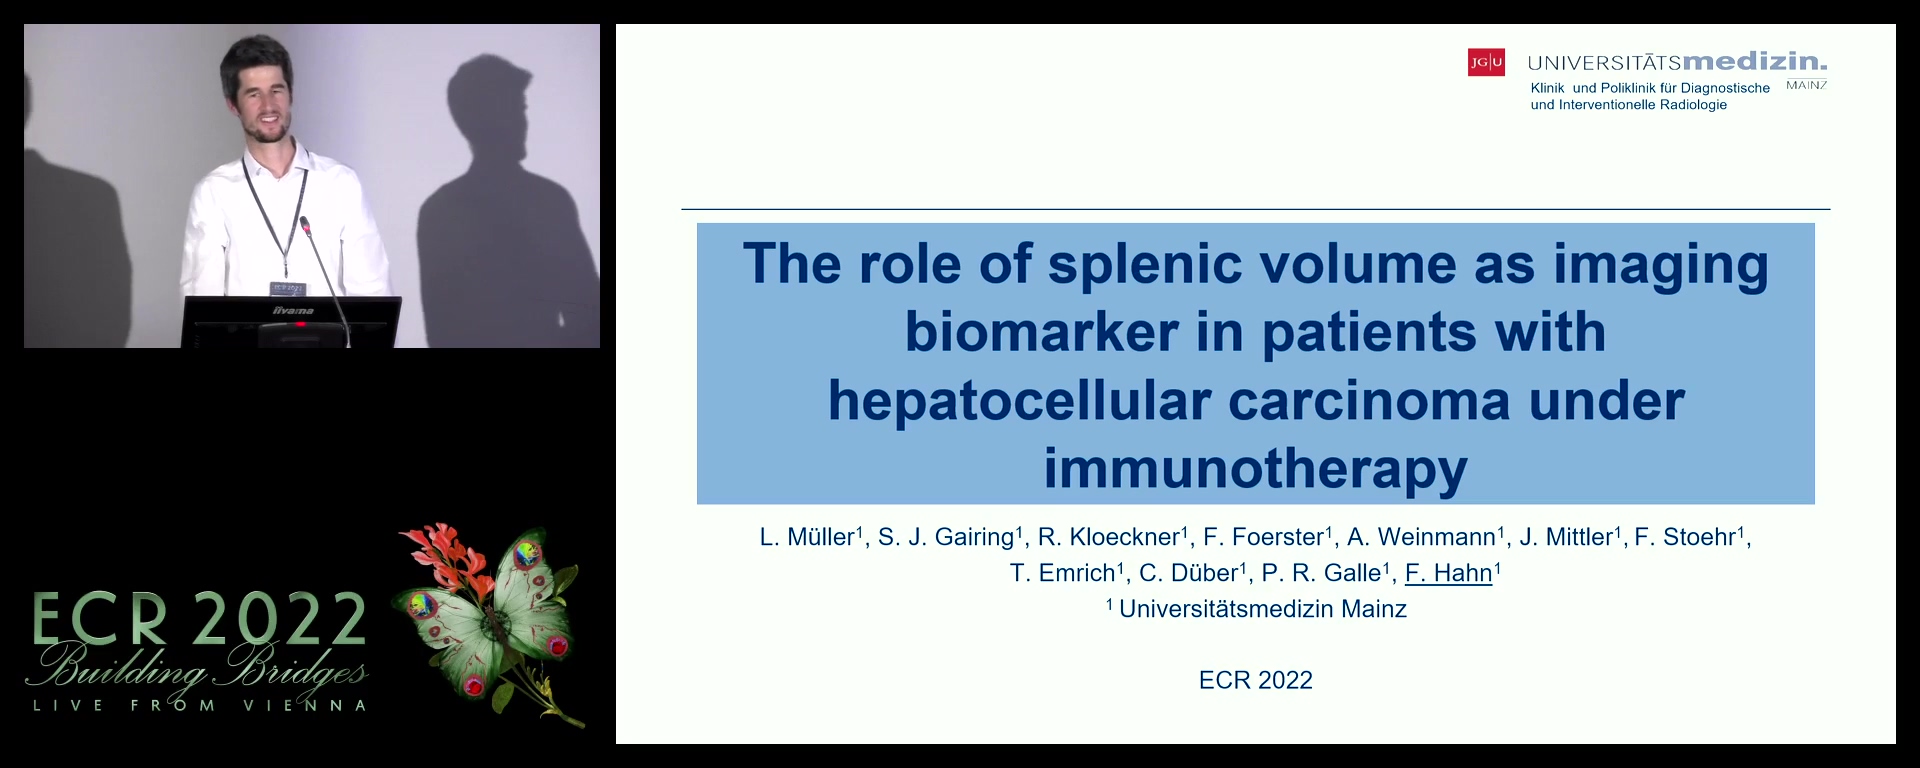 The role of splenic volume as imaging biomarker in patients with hepatocellular carcinoma under immunotherapy - Felix Hahn, Mainz / DE